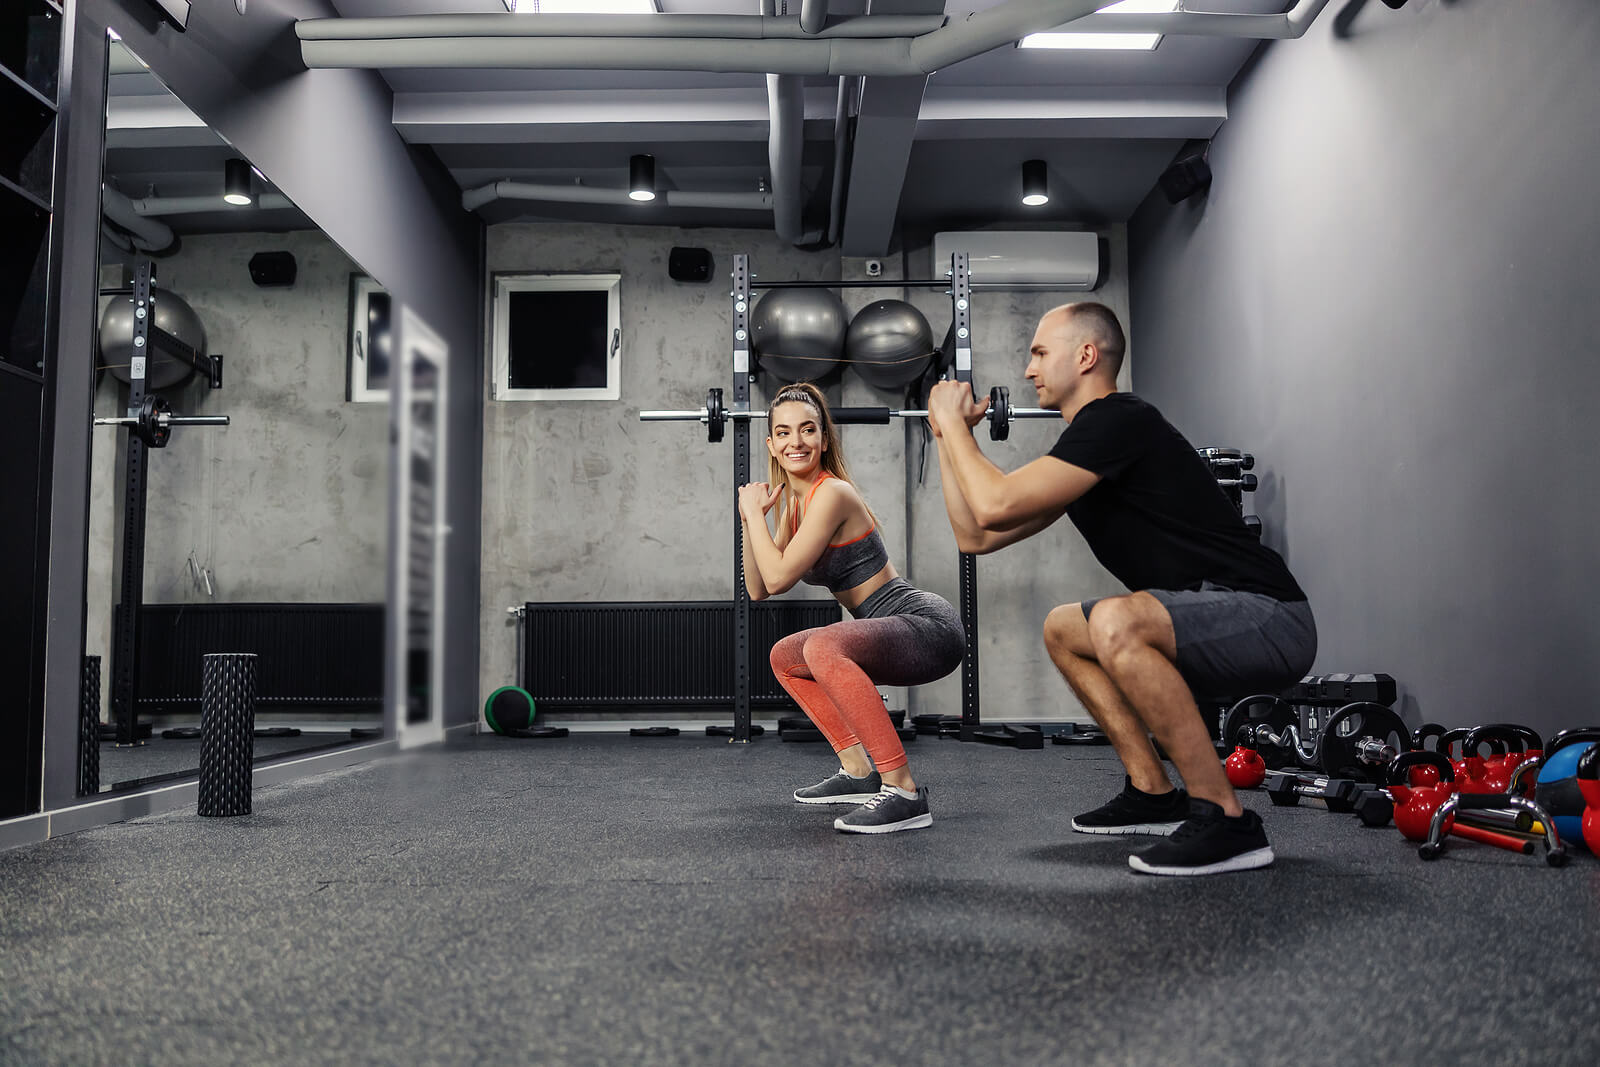 The Concept Of Sports Training For Two, A Duo. A Man And A Woman